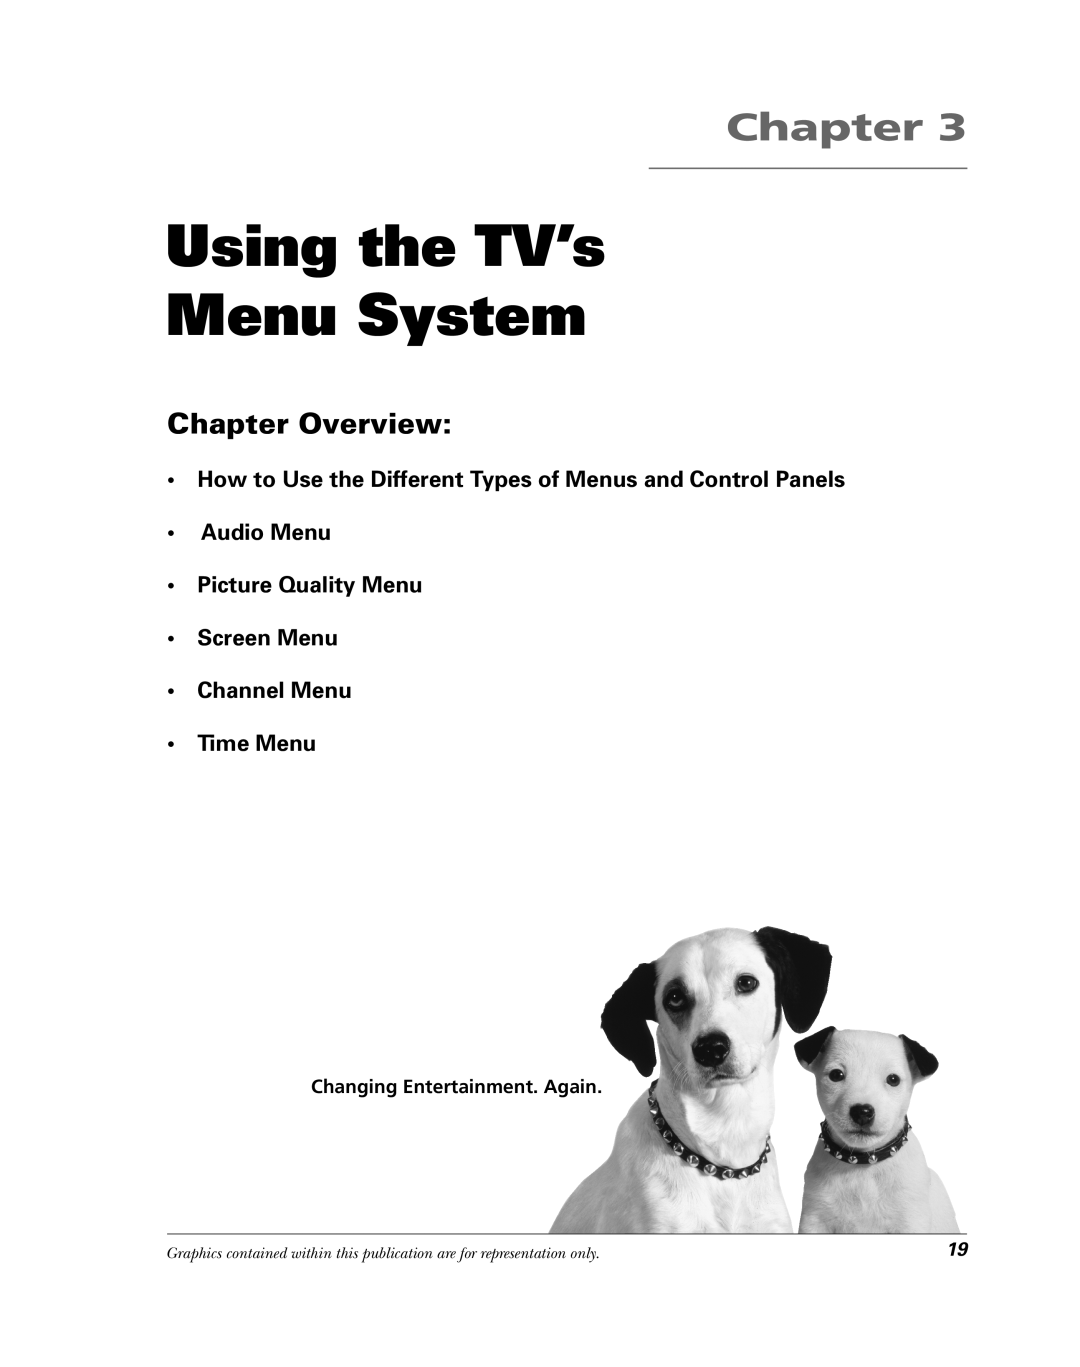 RCA 15956220 Using the TV’s Menu System, How to Use the Different Types of Menus and Control Panels Audio Menu, Chapter 